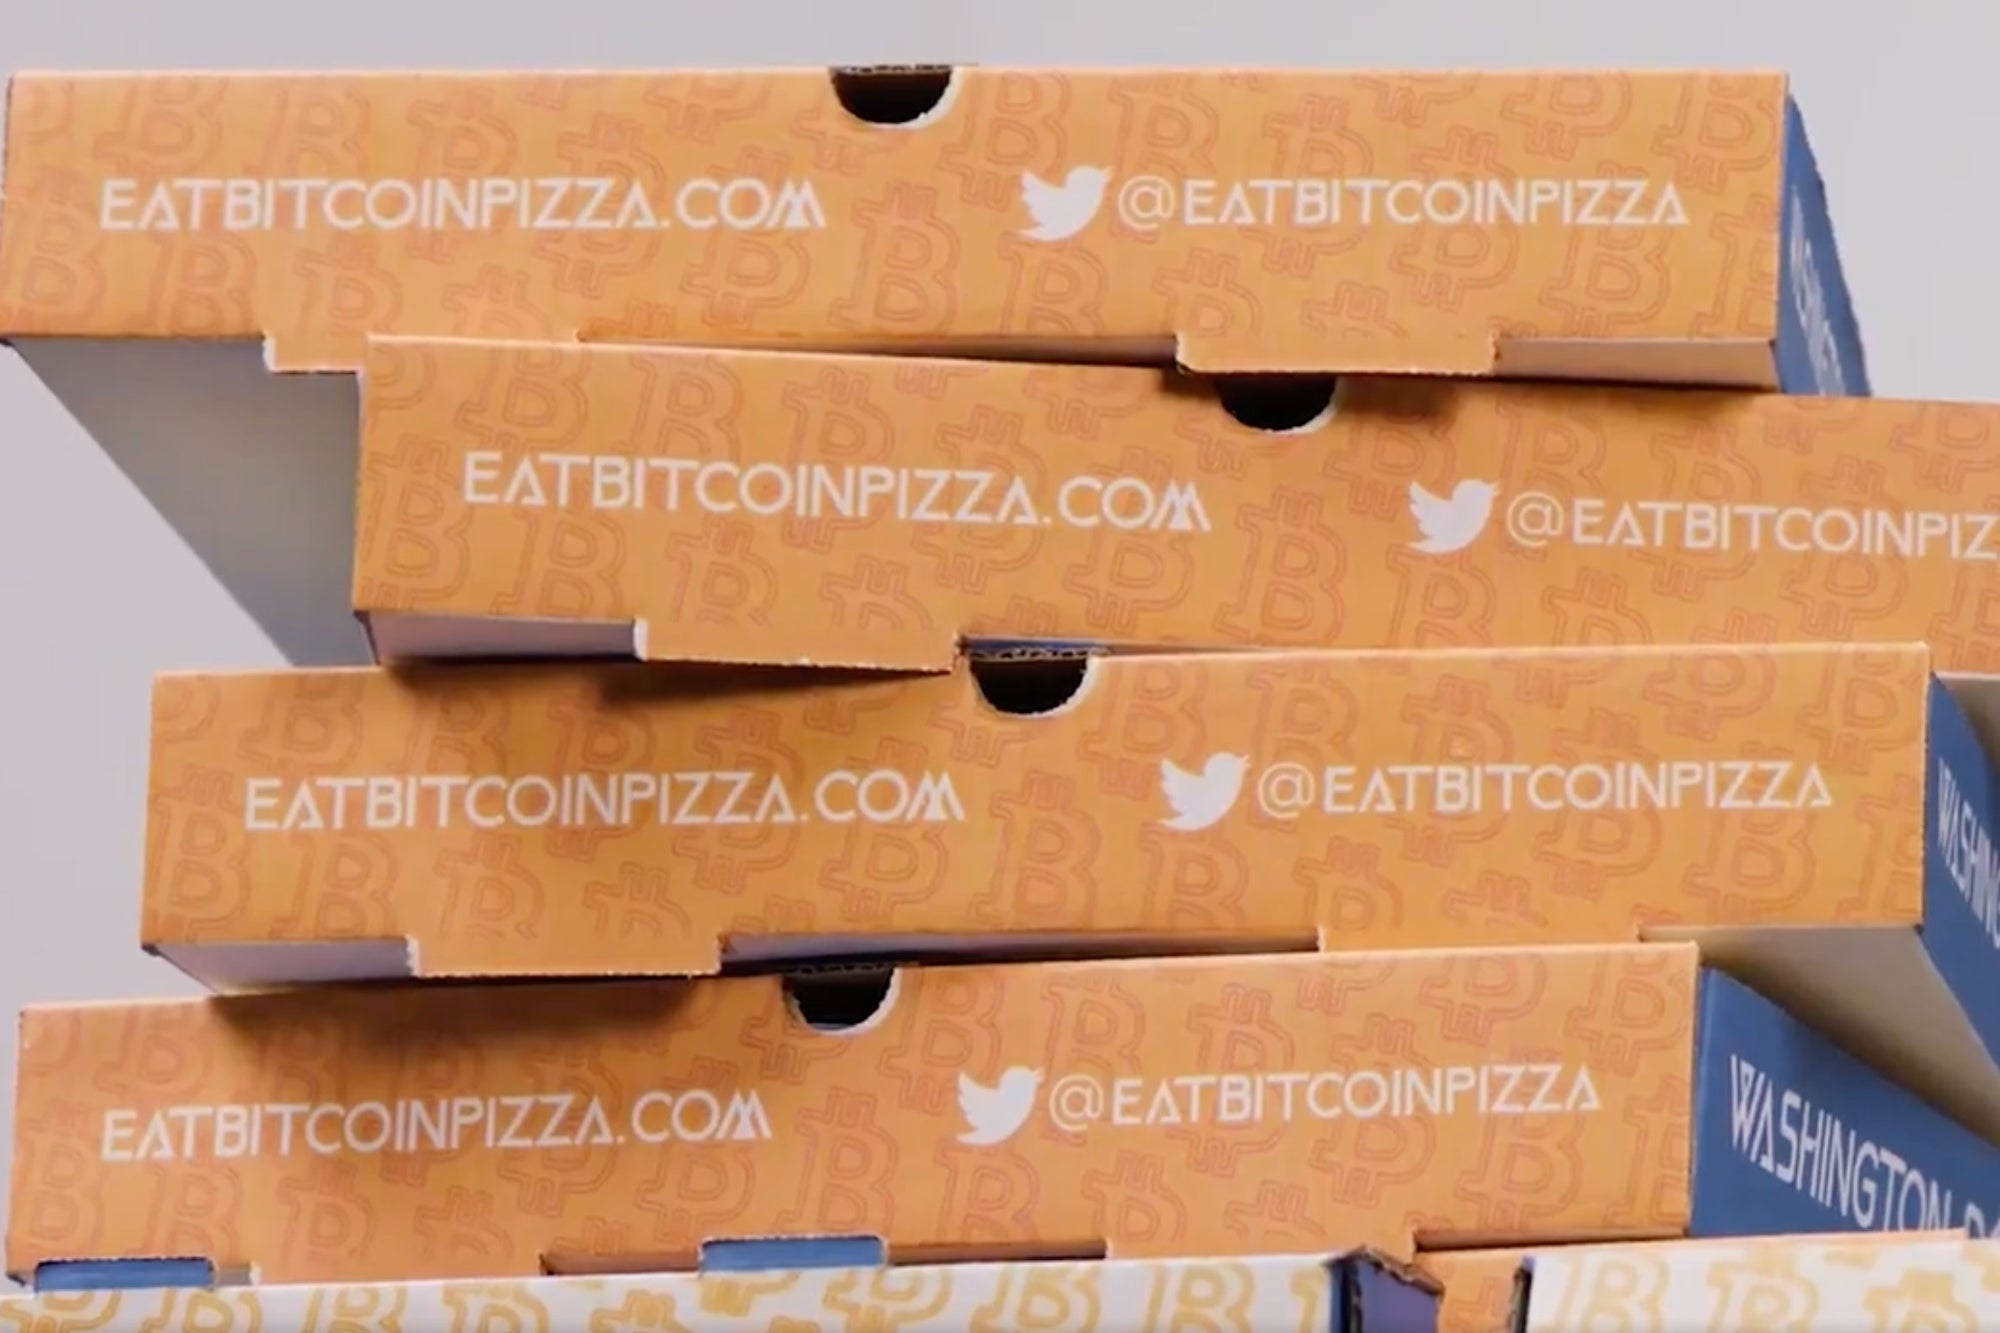 10, Bitcoins Could Buy 2 Pizzas in but Now Worth $ Million